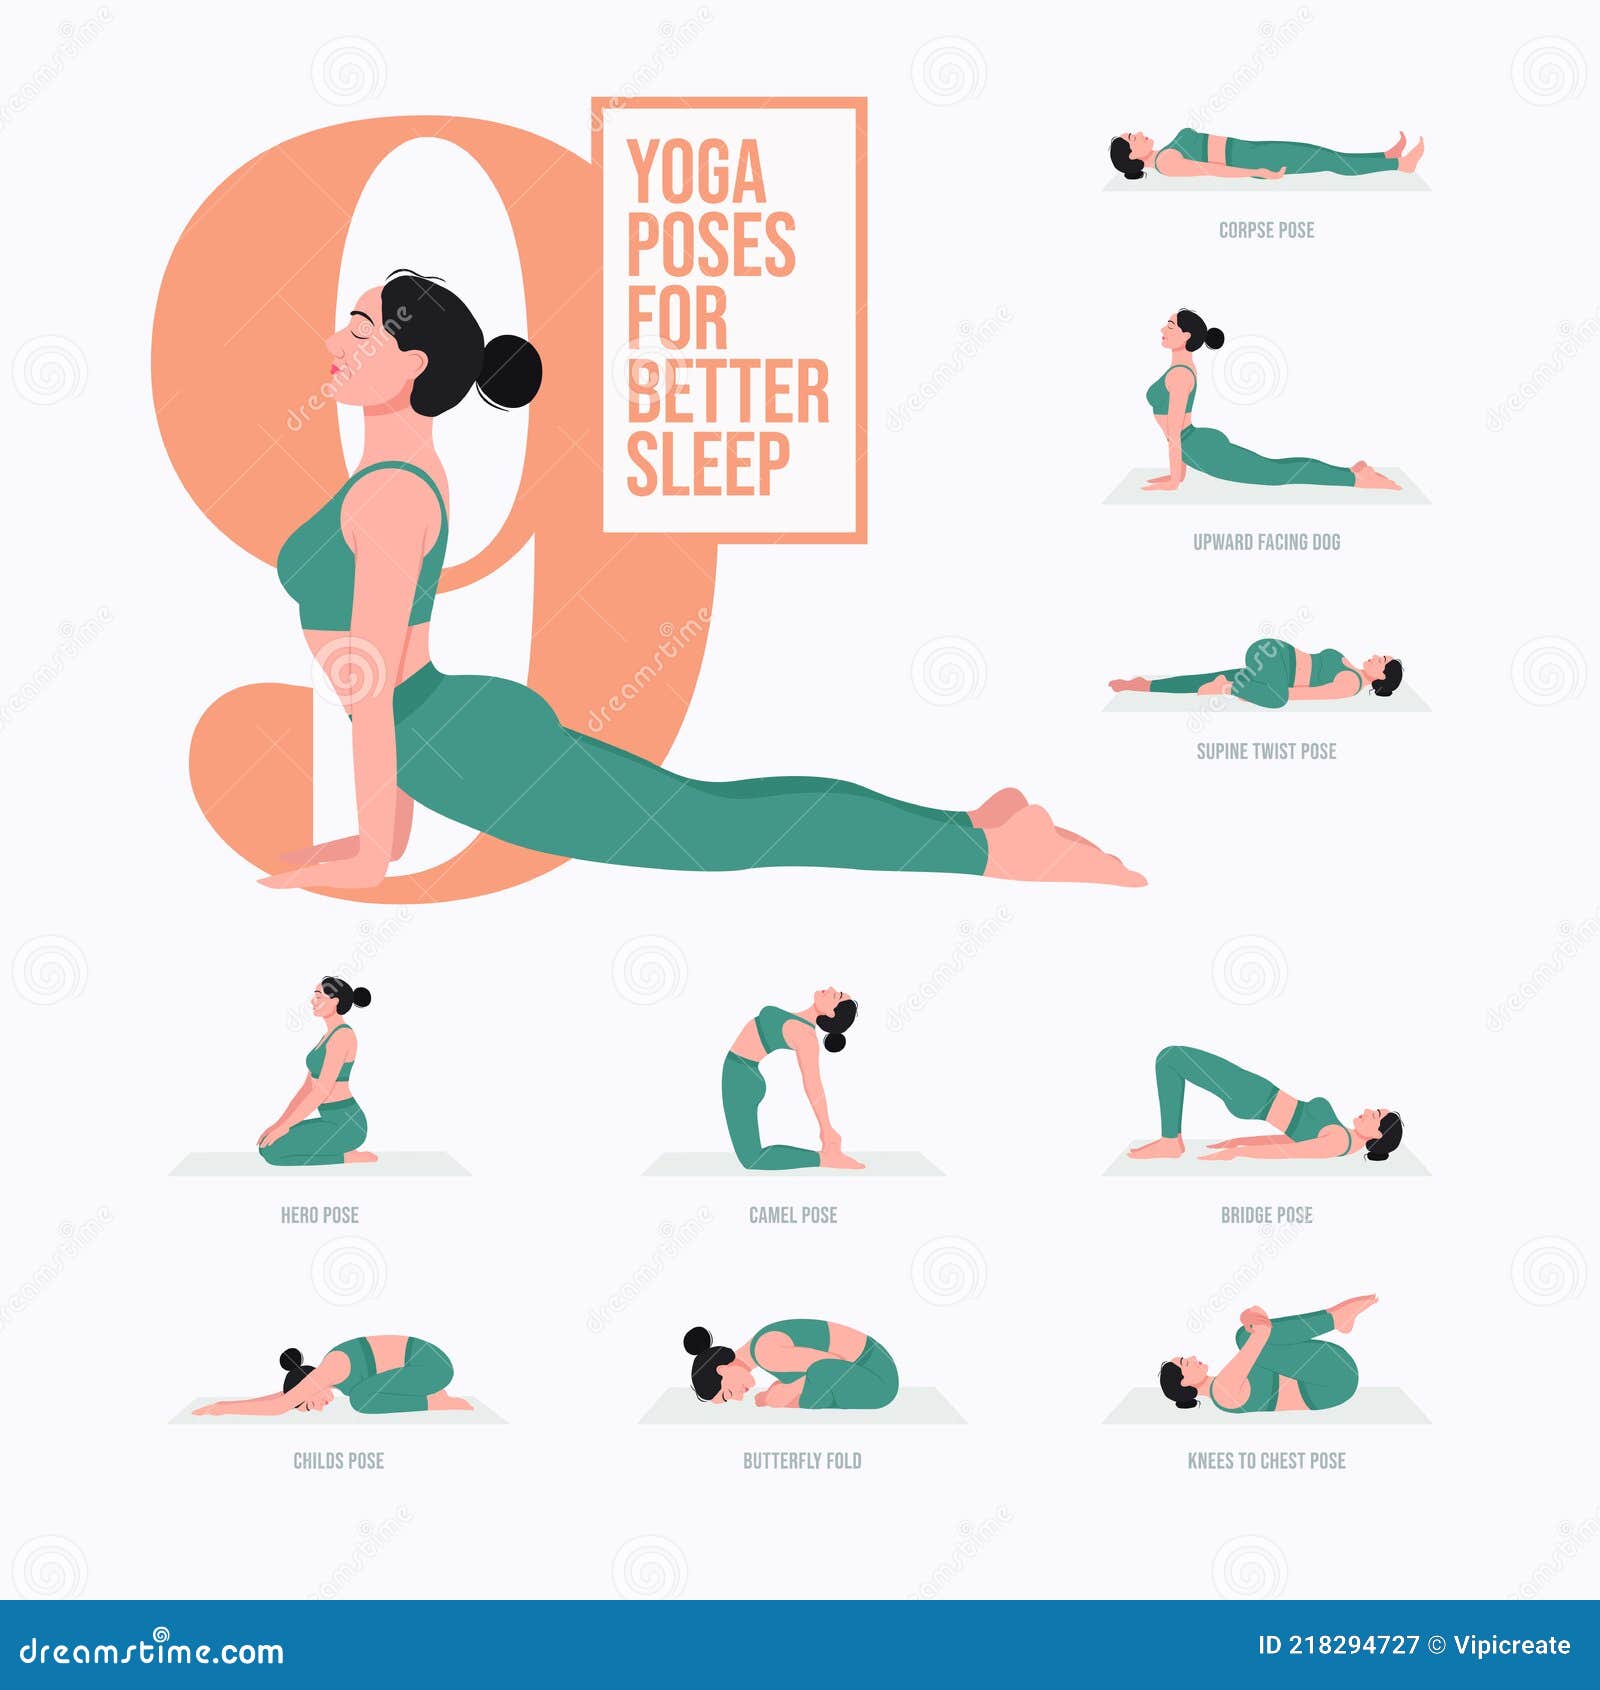 Get Better Sleep With These 9 Yoga Poses